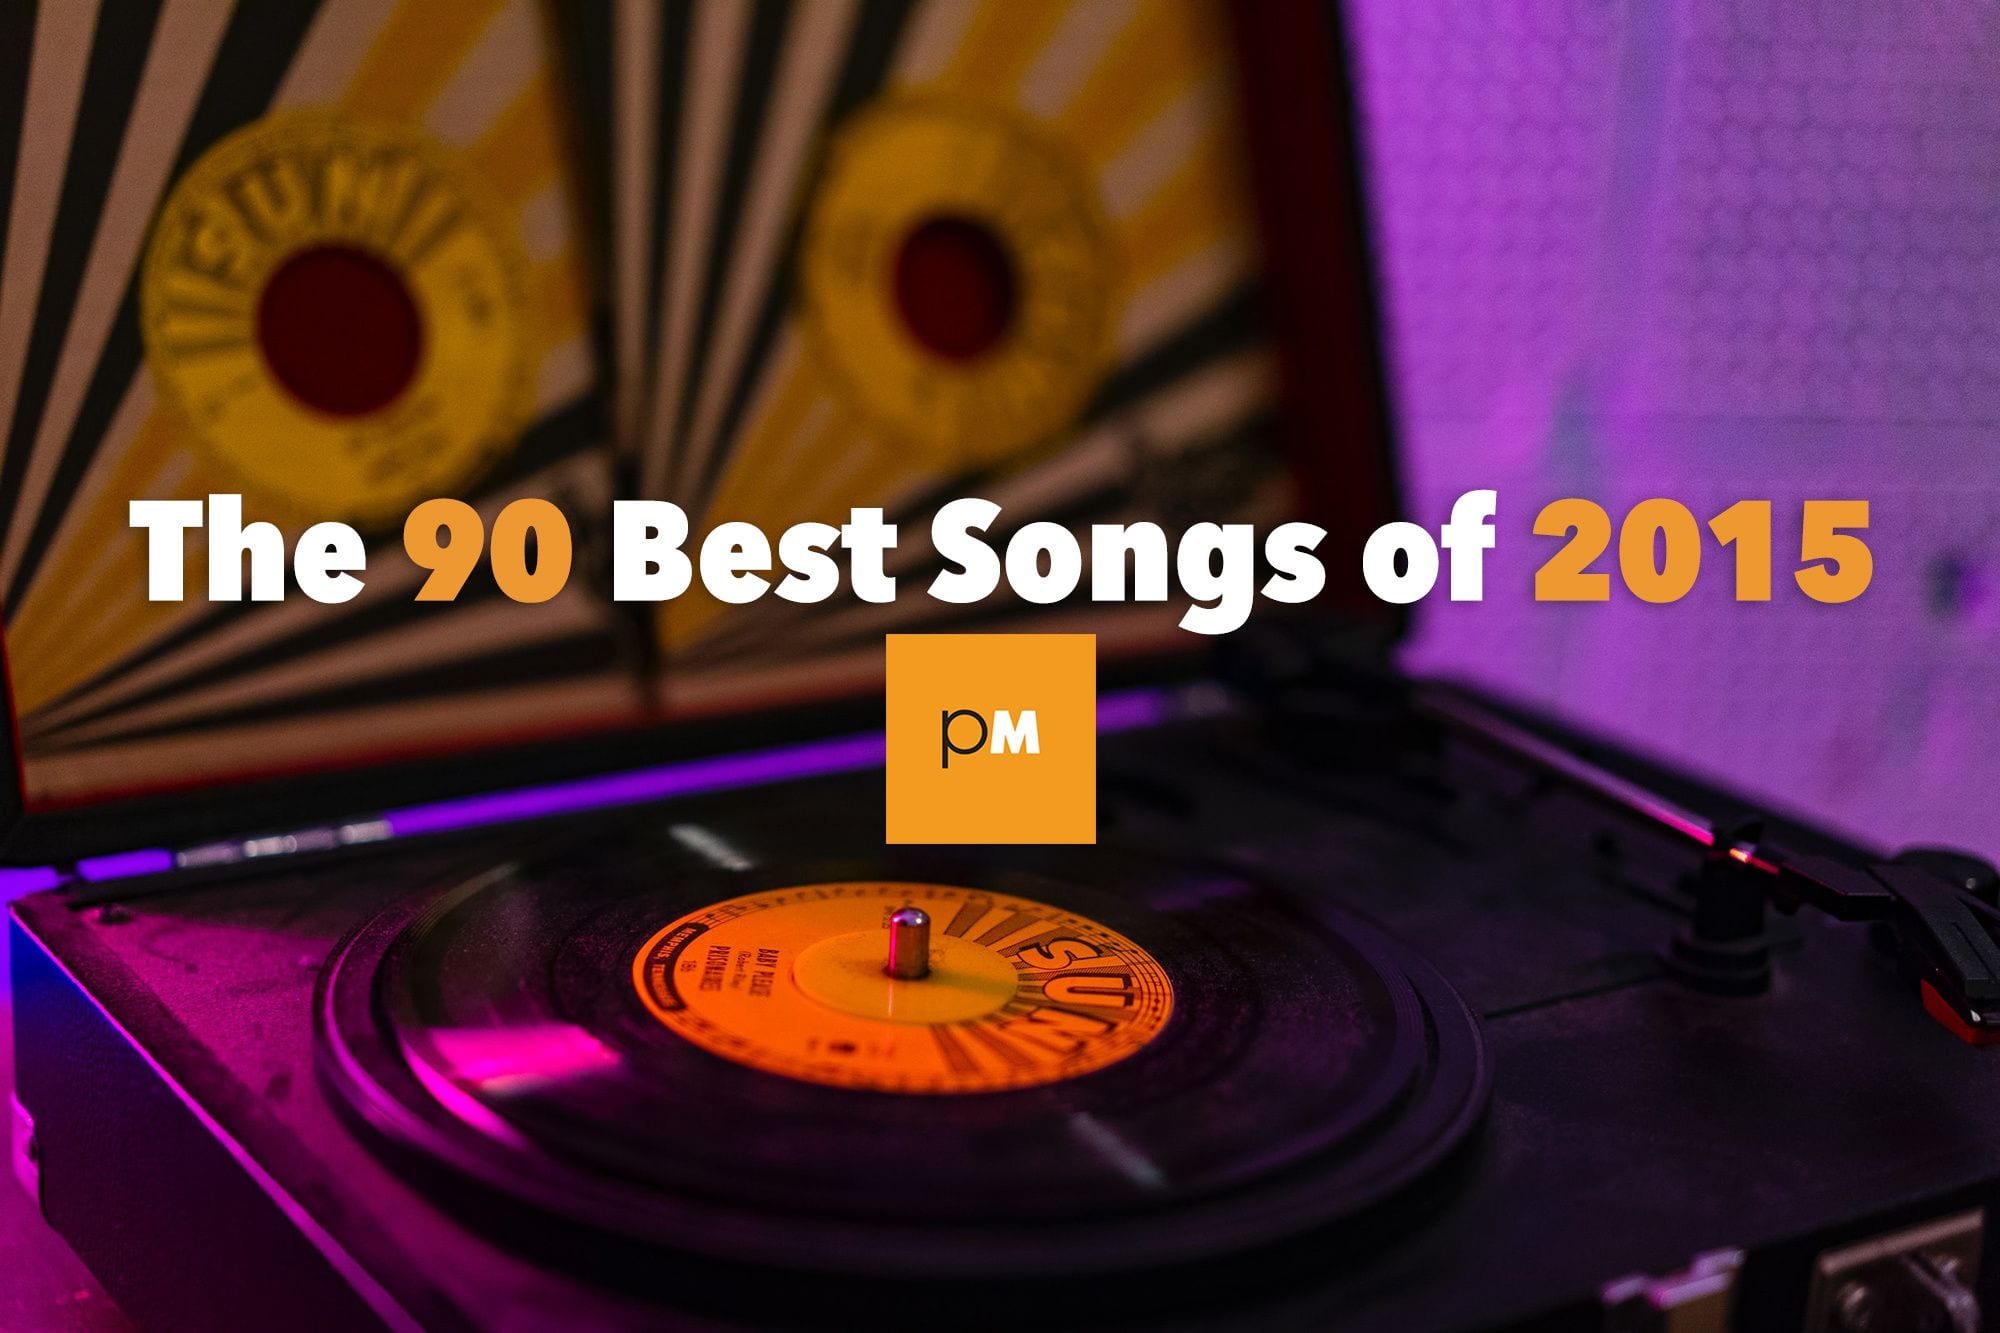 The 90 Best Songs of 2015